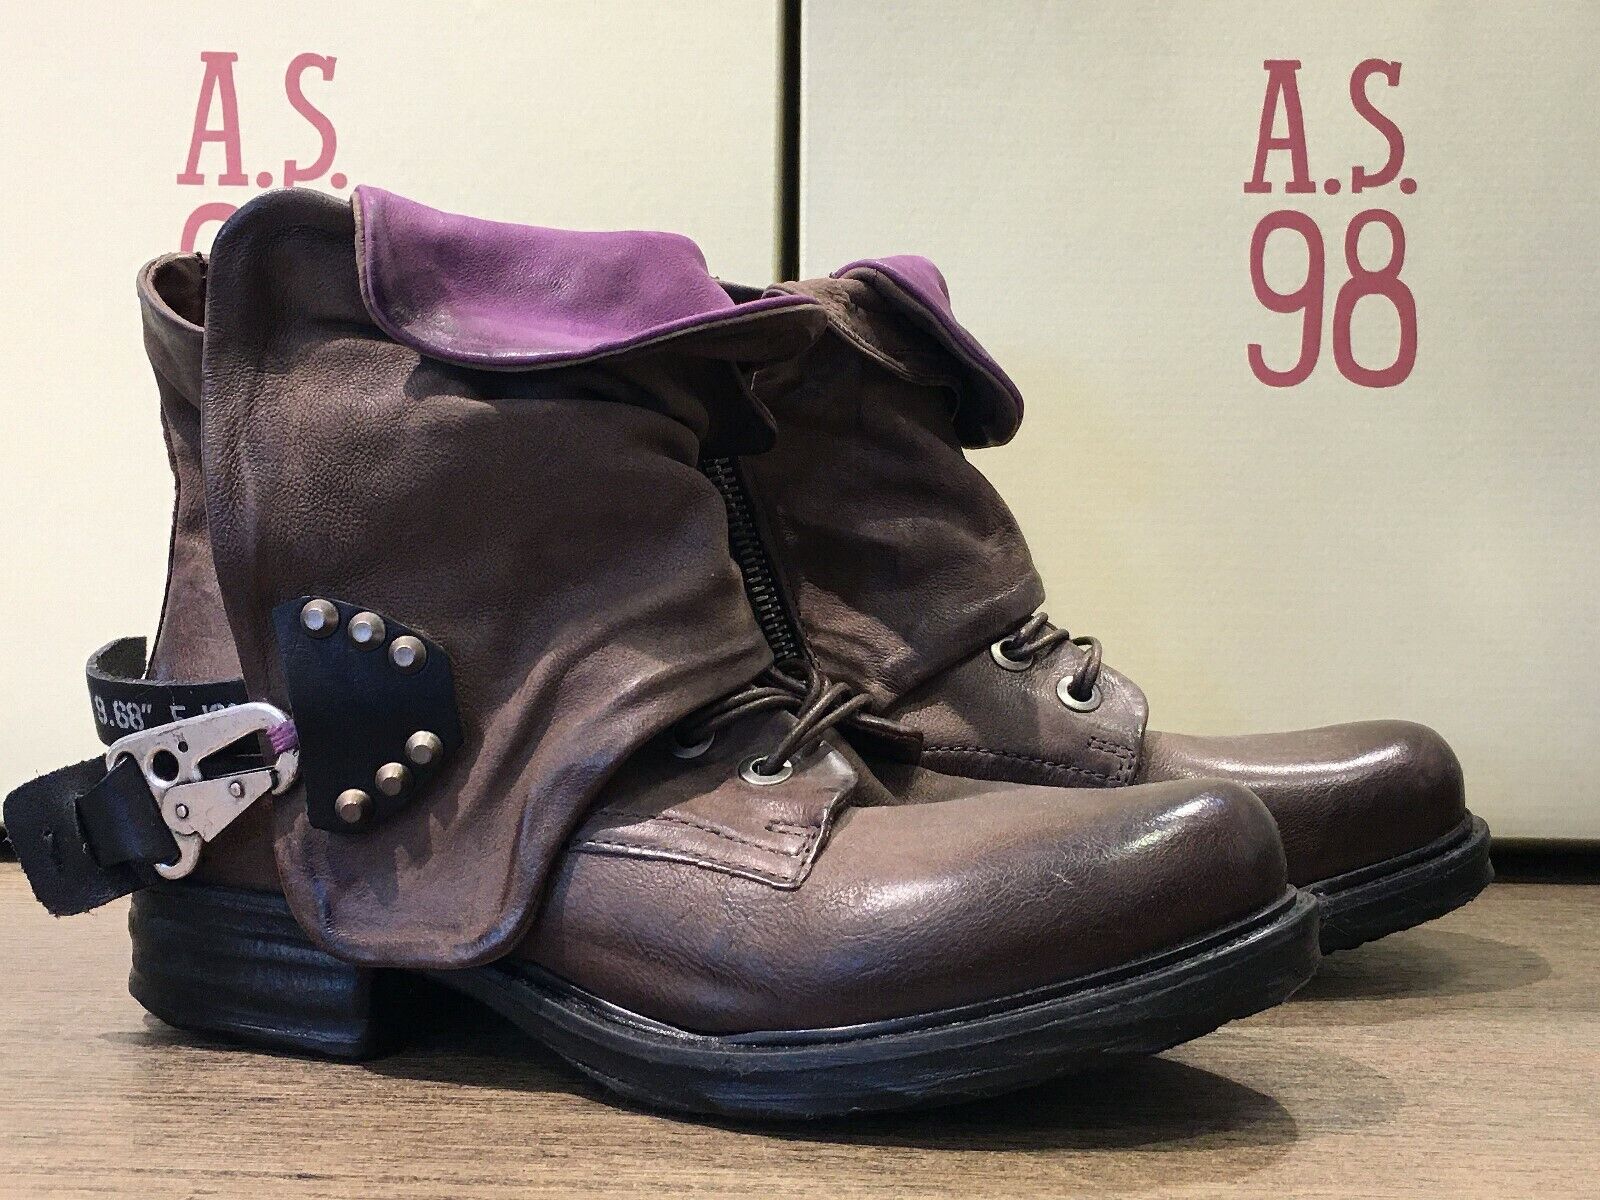  A.S.98 AS98 Airstep Boots Stiefel Stiefelette Braun Lila Gr. 39 UVP 229